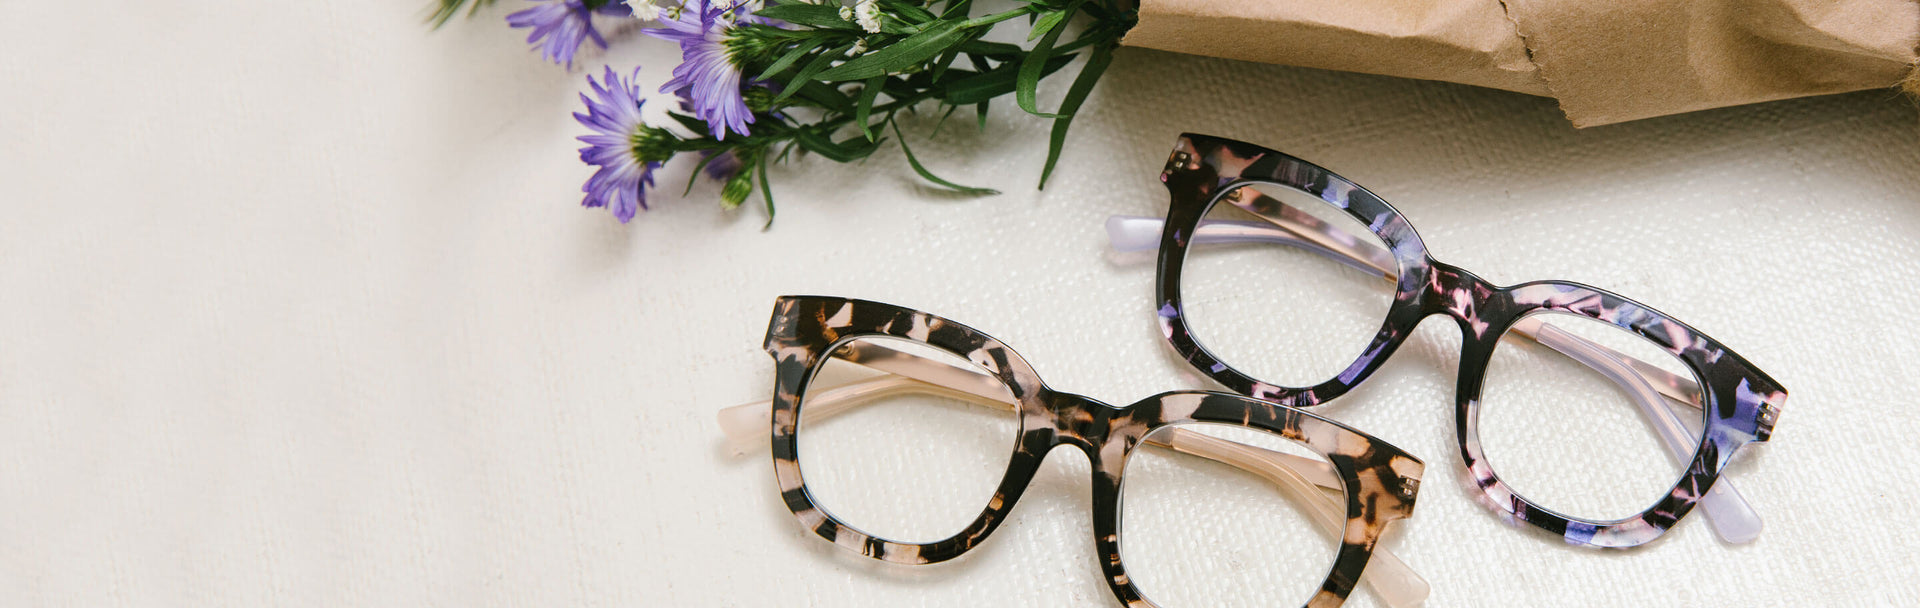 How to Pick Cat Eye Glasses for Your Face Shape - Peepers by PeeperSpecs